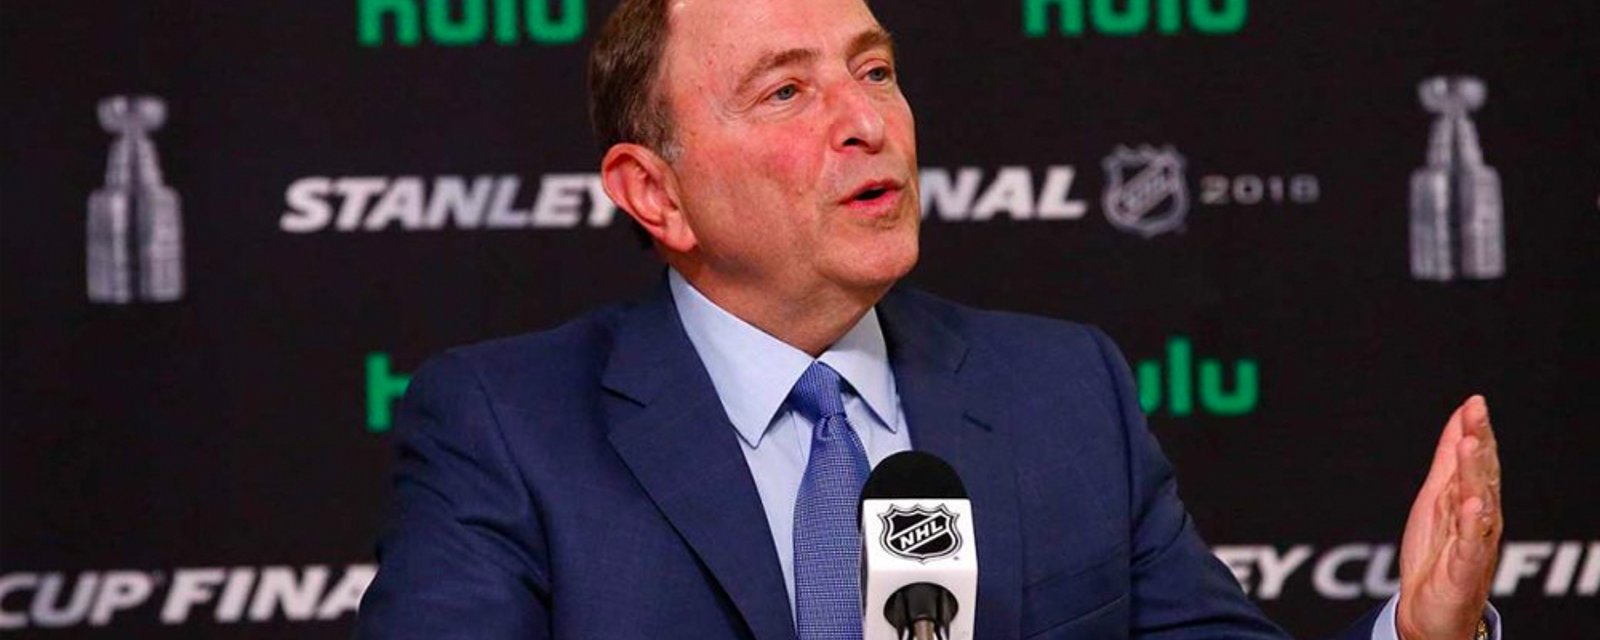 NHL officially suspends 2019-20 season, so what's next?